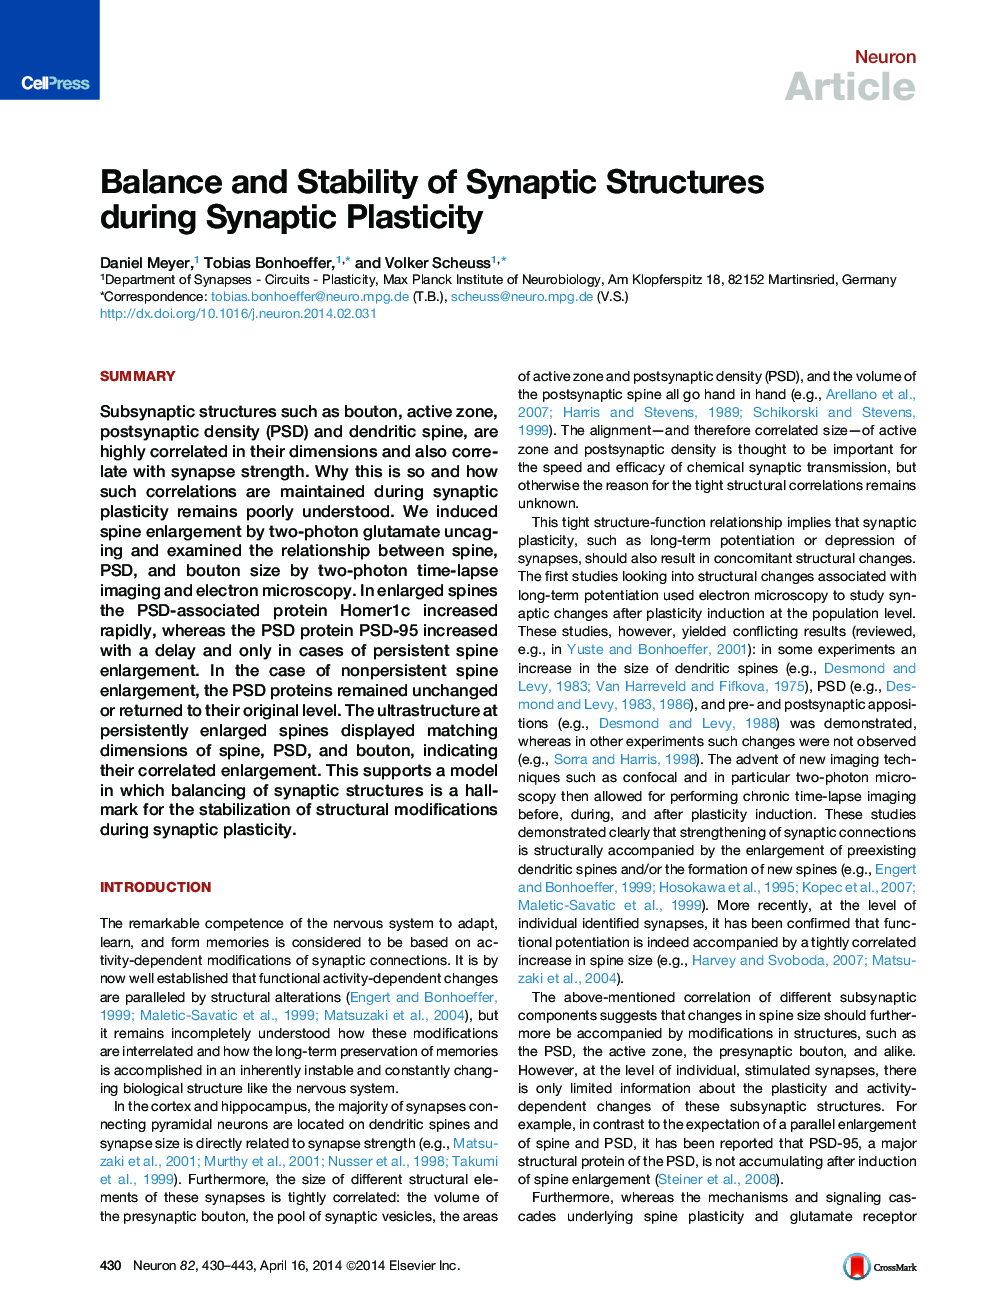 Balance and Stability of Synaptic Structures during Synaptic Plasticity